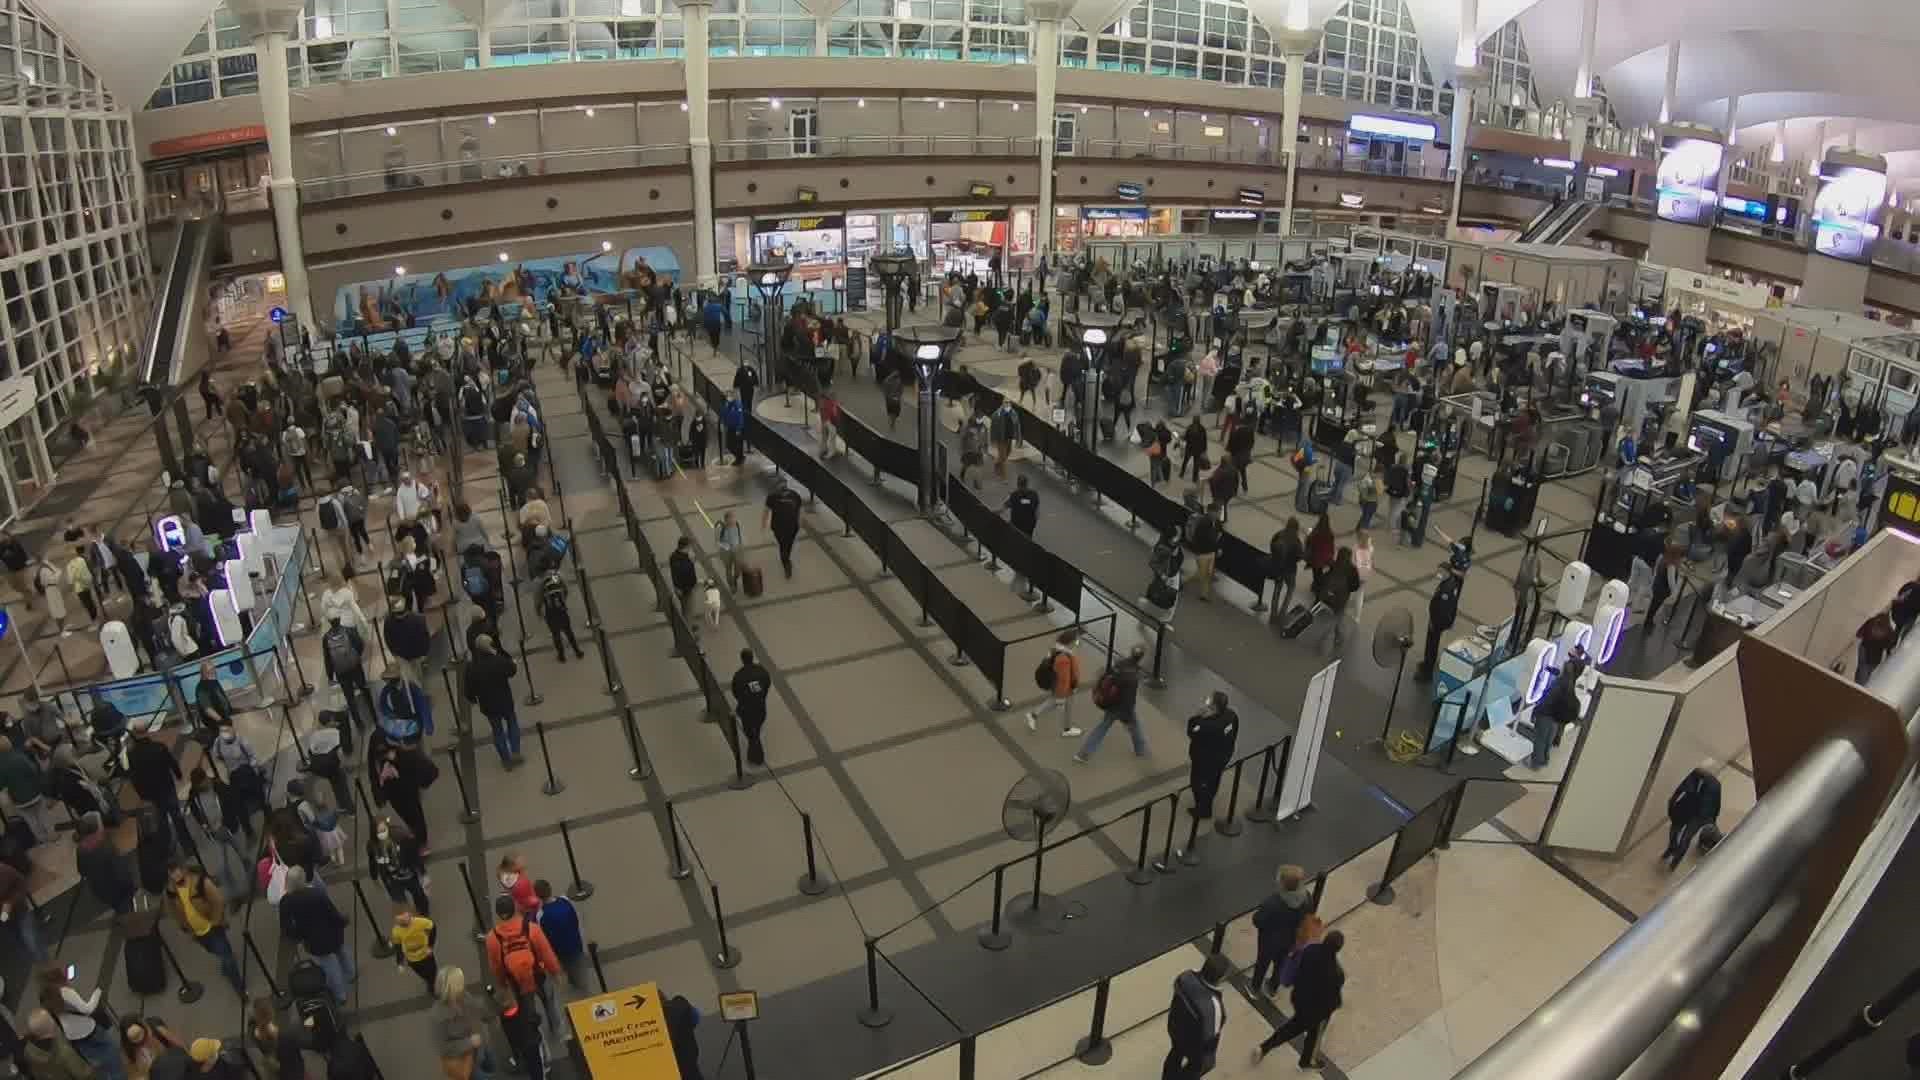 Denver International Airport is following the Transportation Security Administration's direction and no longer requiring masks in the airport.